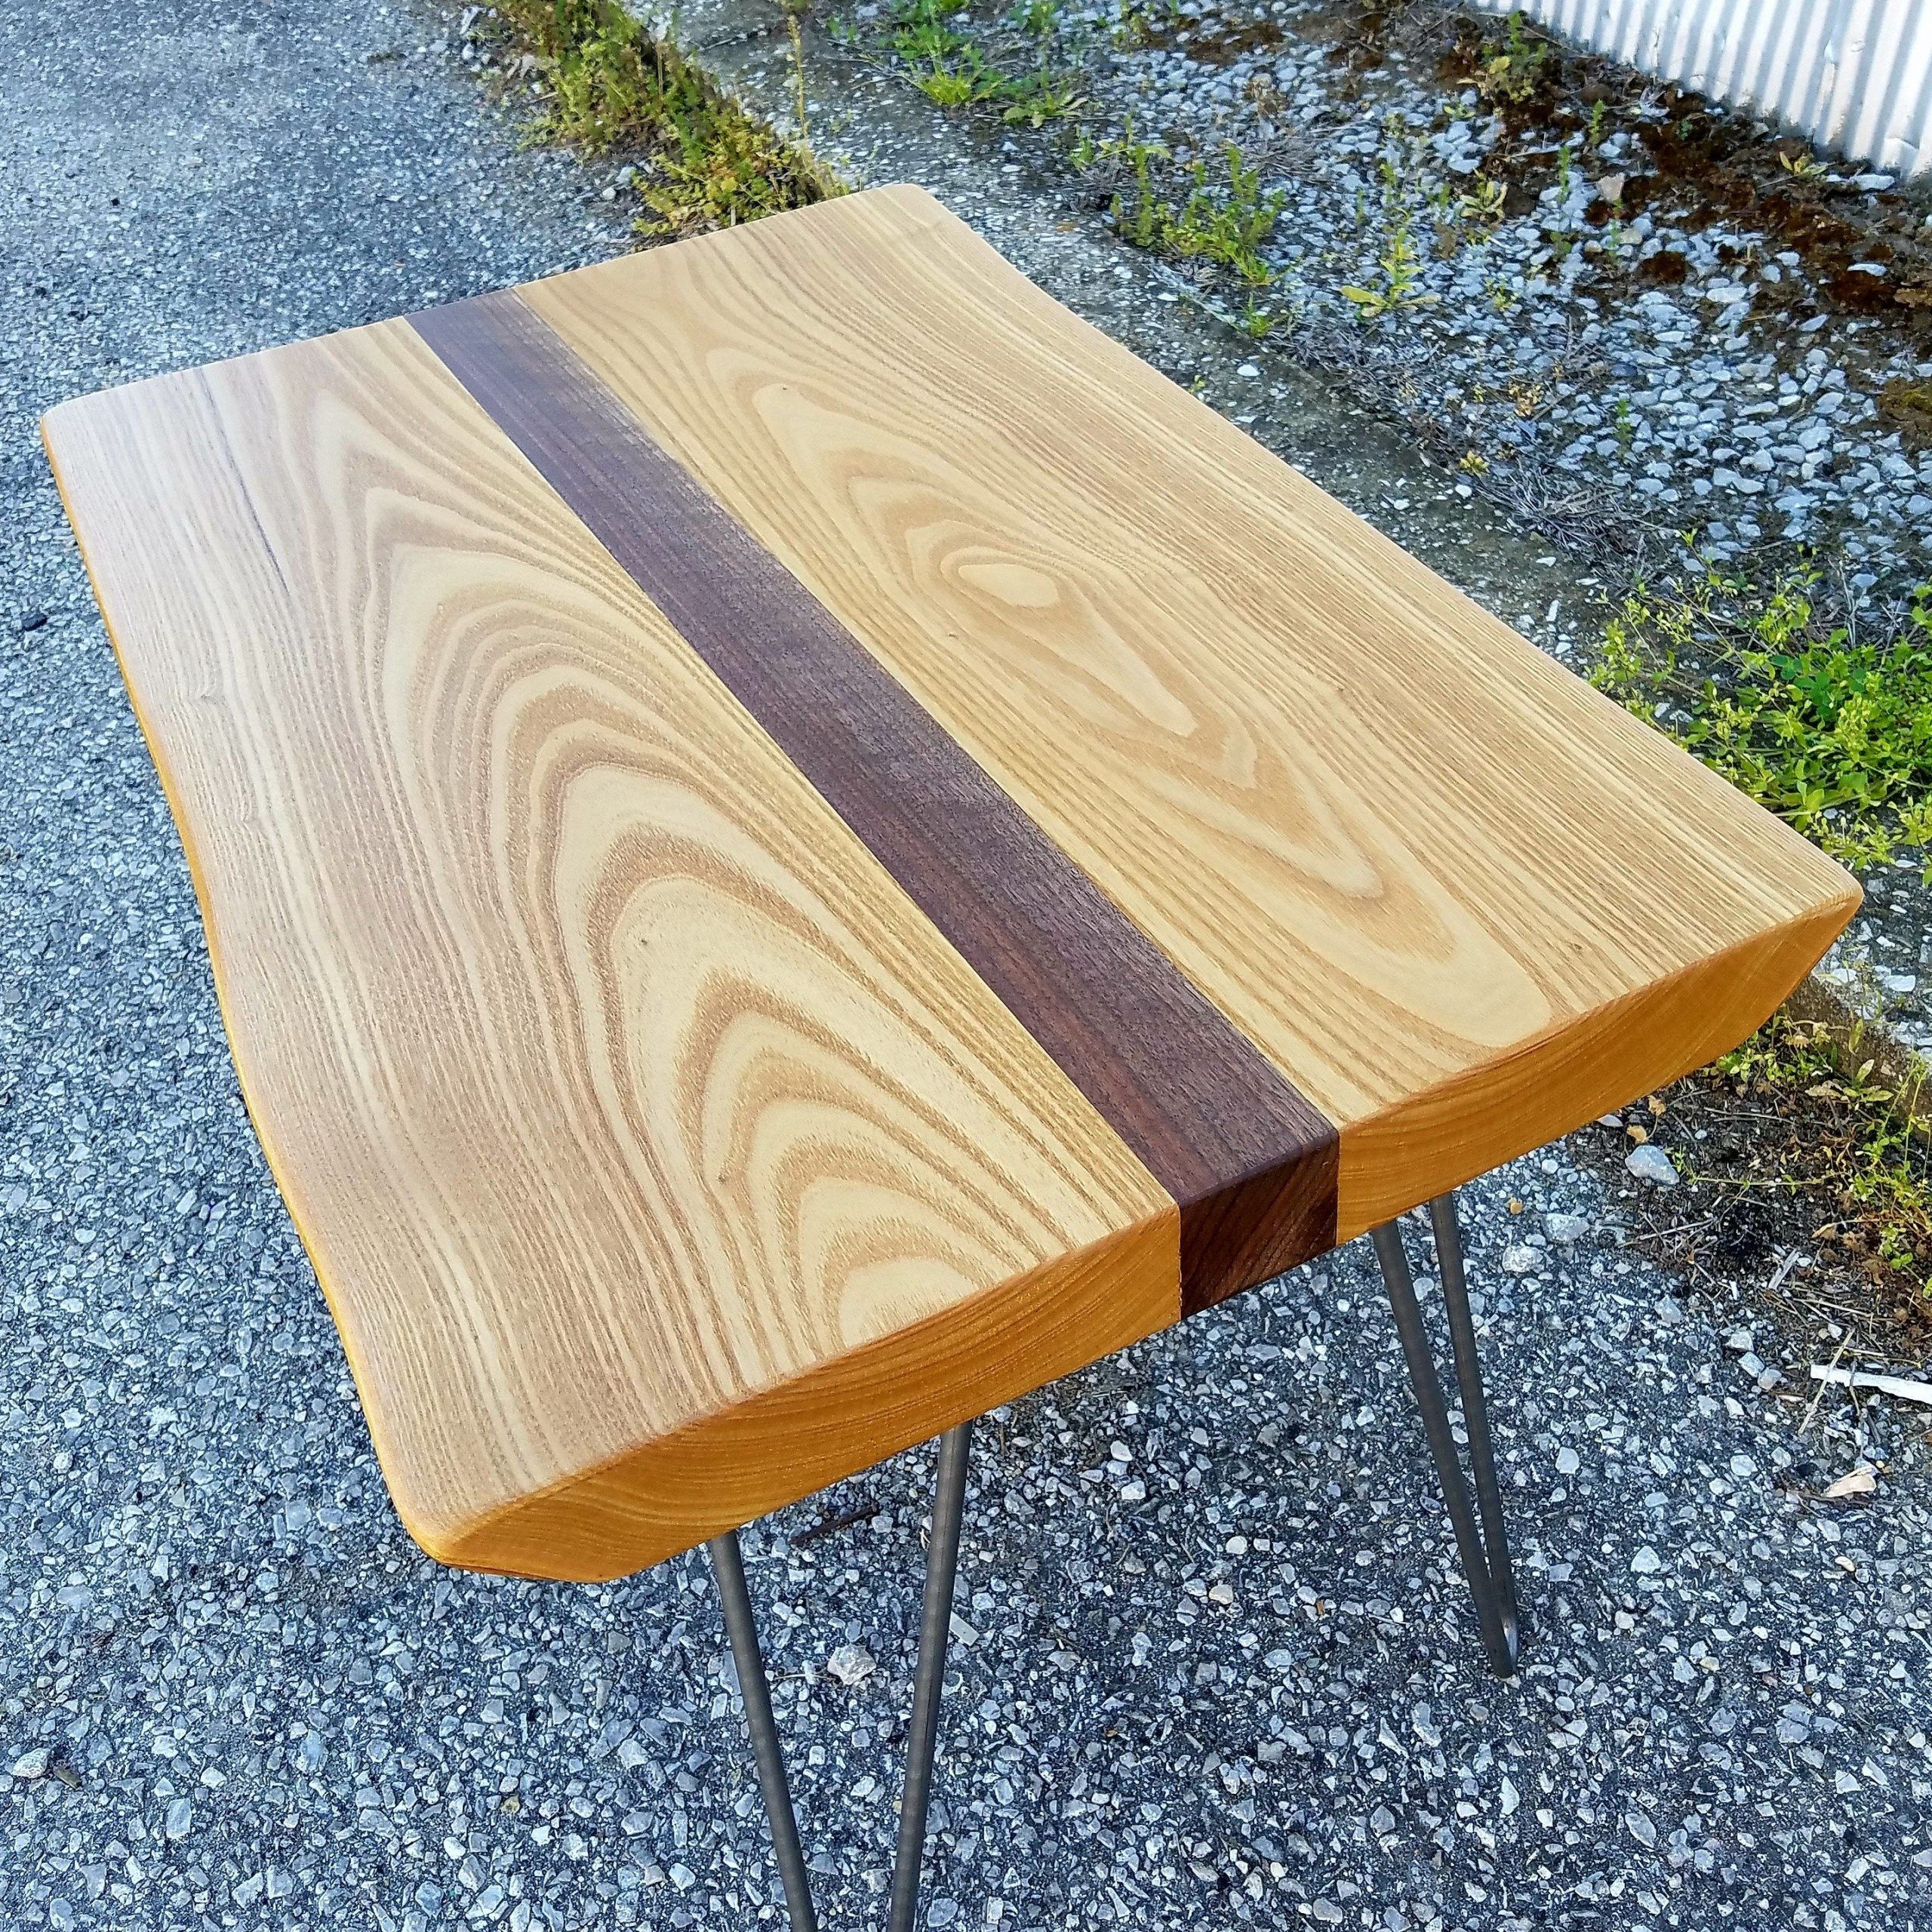 Most Recent Cocoa Coffee Tables Regarding Hand Made Catalpa And Walnut Live Edge Coffee Table  Small (View 15 of 20)